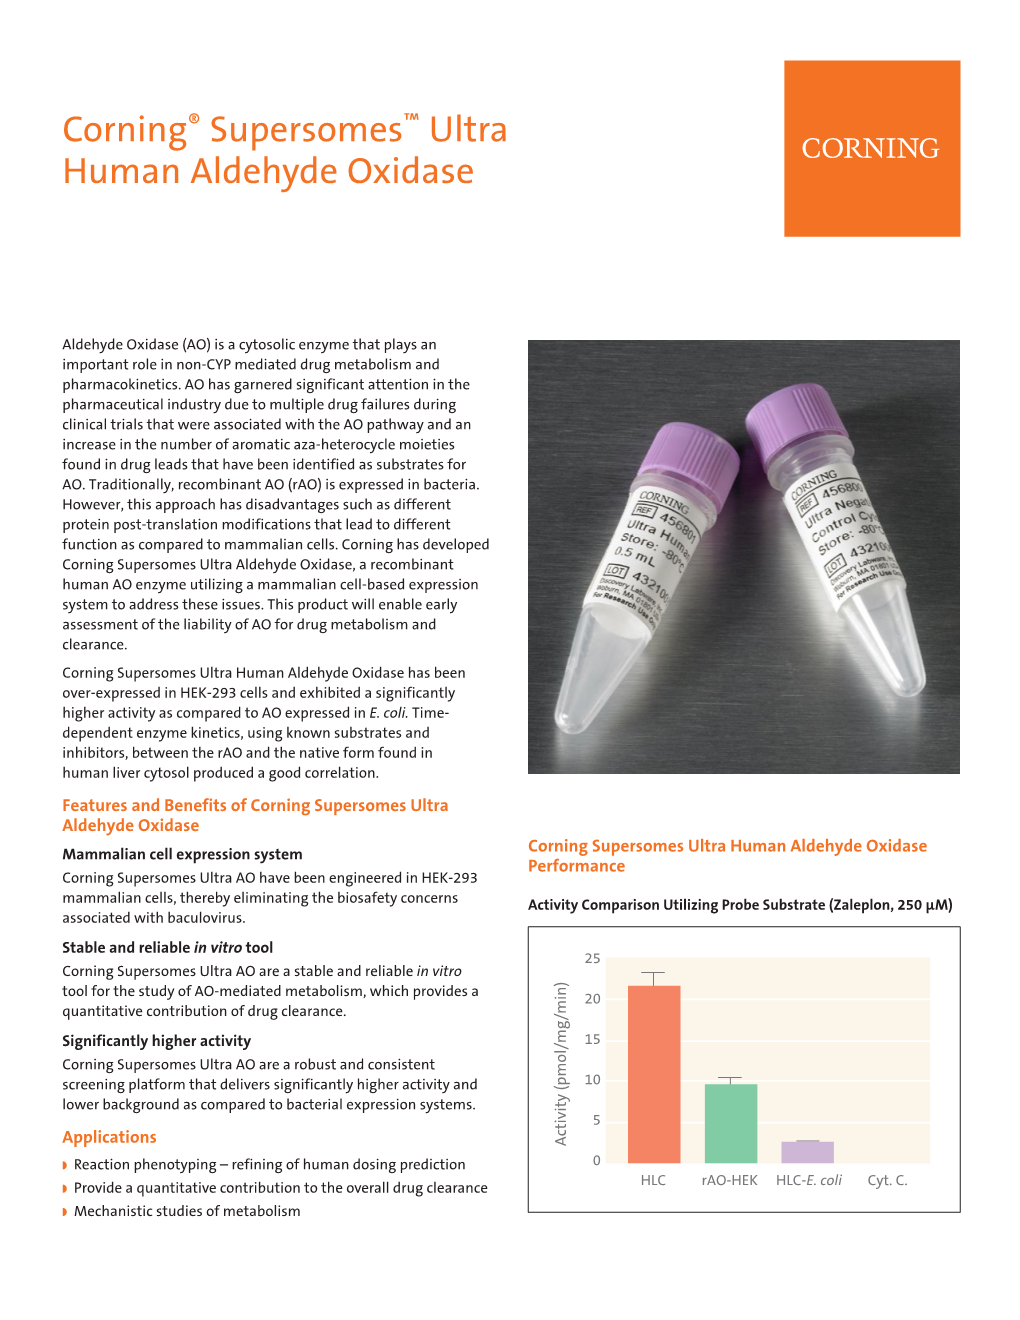 Corning® Supersomes™ Ultra Human Aldehyde Oxidase